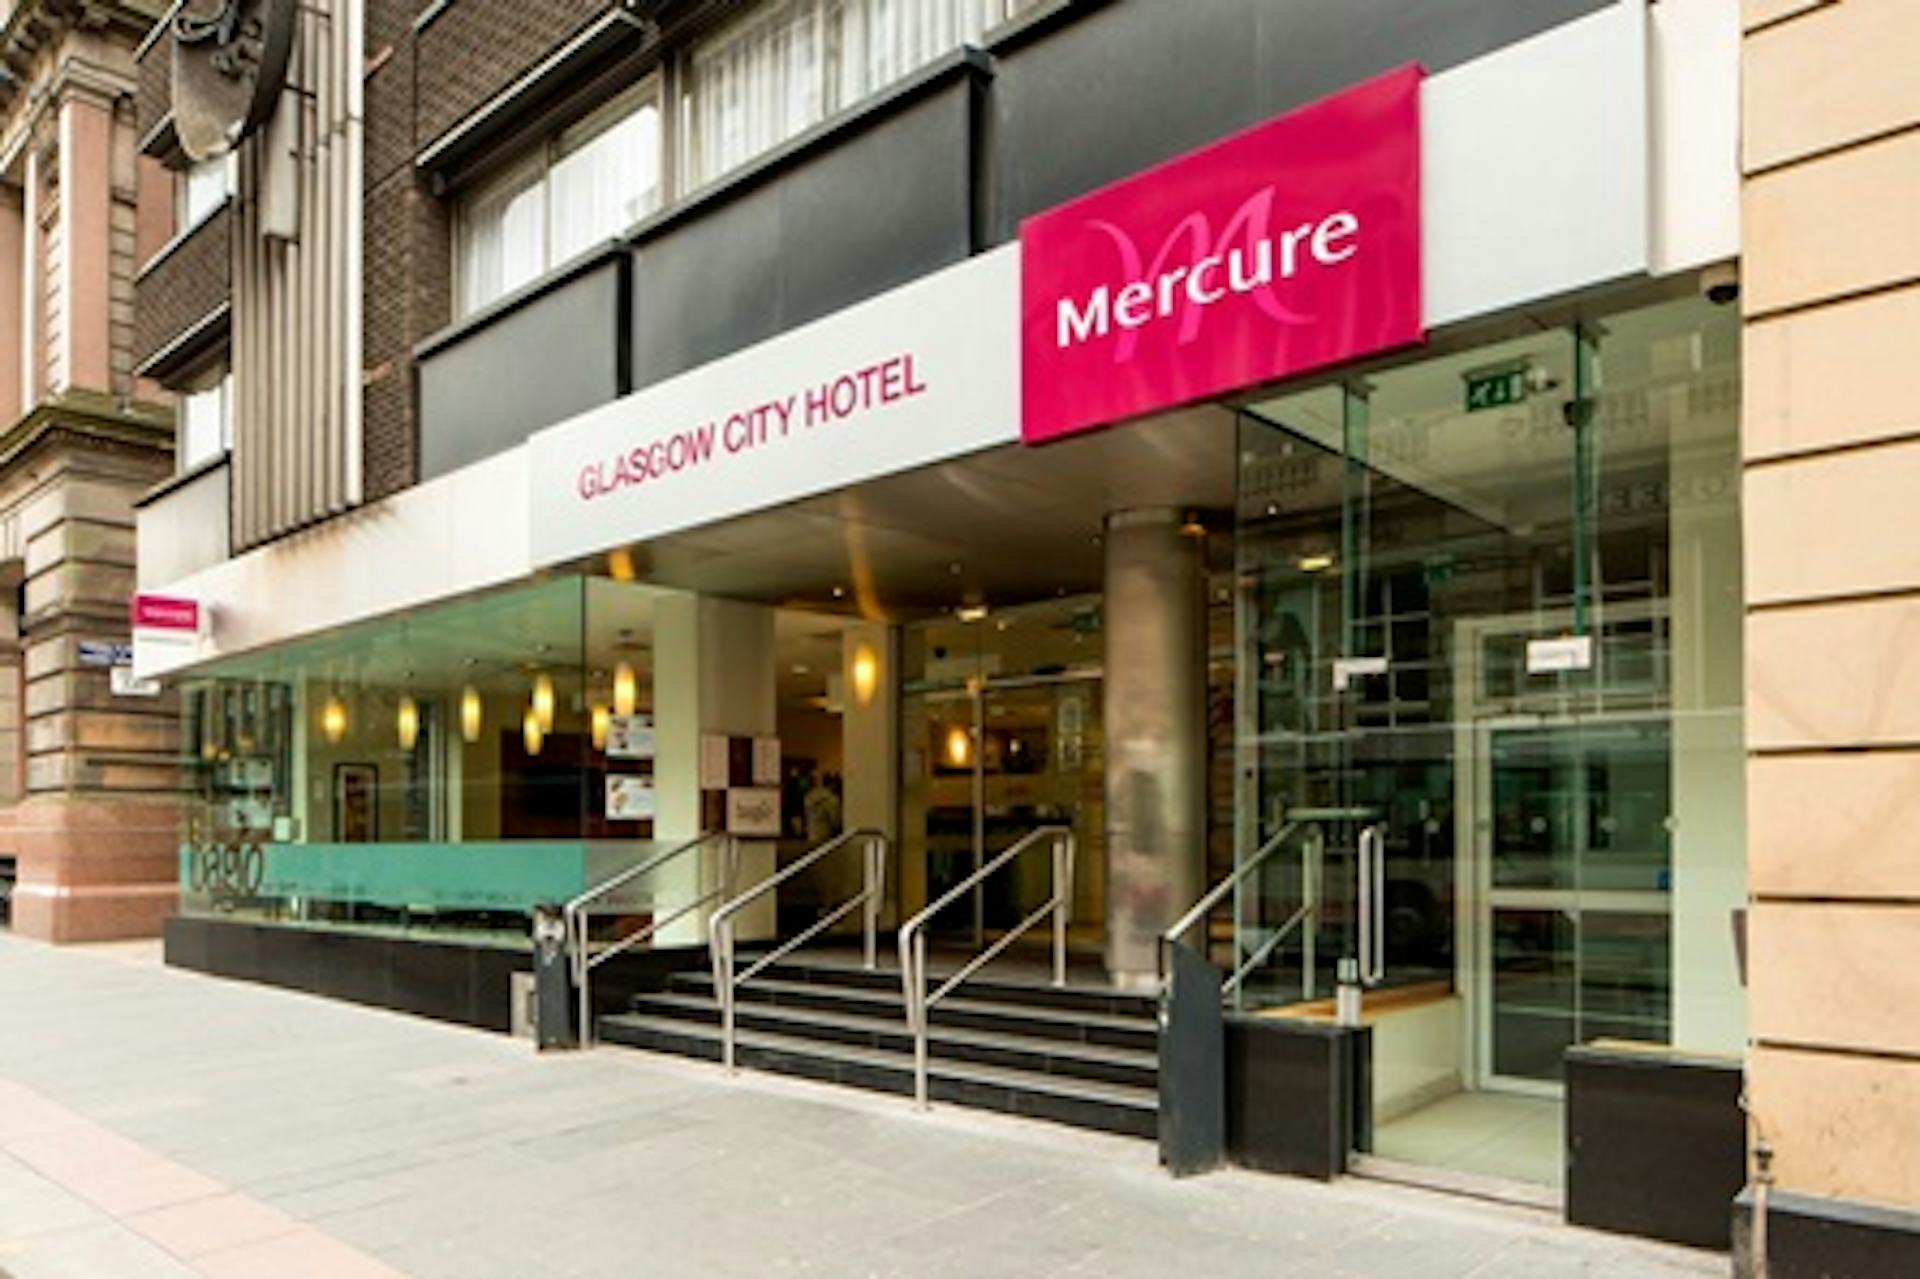 One Night Break for Two at the Glasgow City Hotel